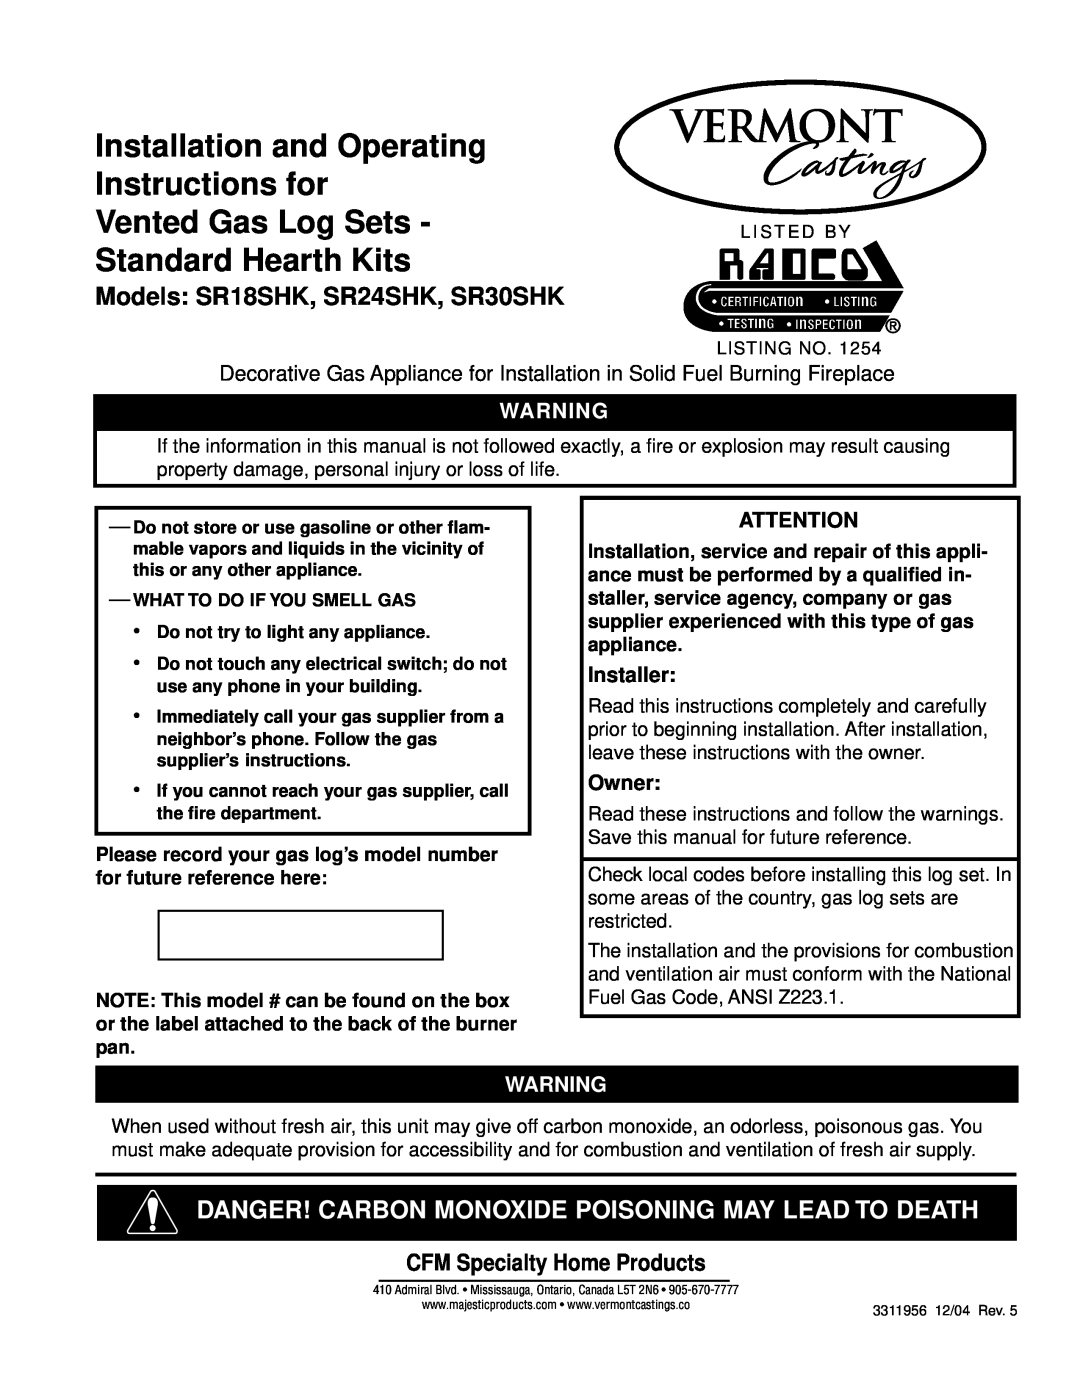 Vermont Casting SR18SHK manual Installation and Operating Instructions for, Vented Gas Log Sets - Standard Hearth Kits 